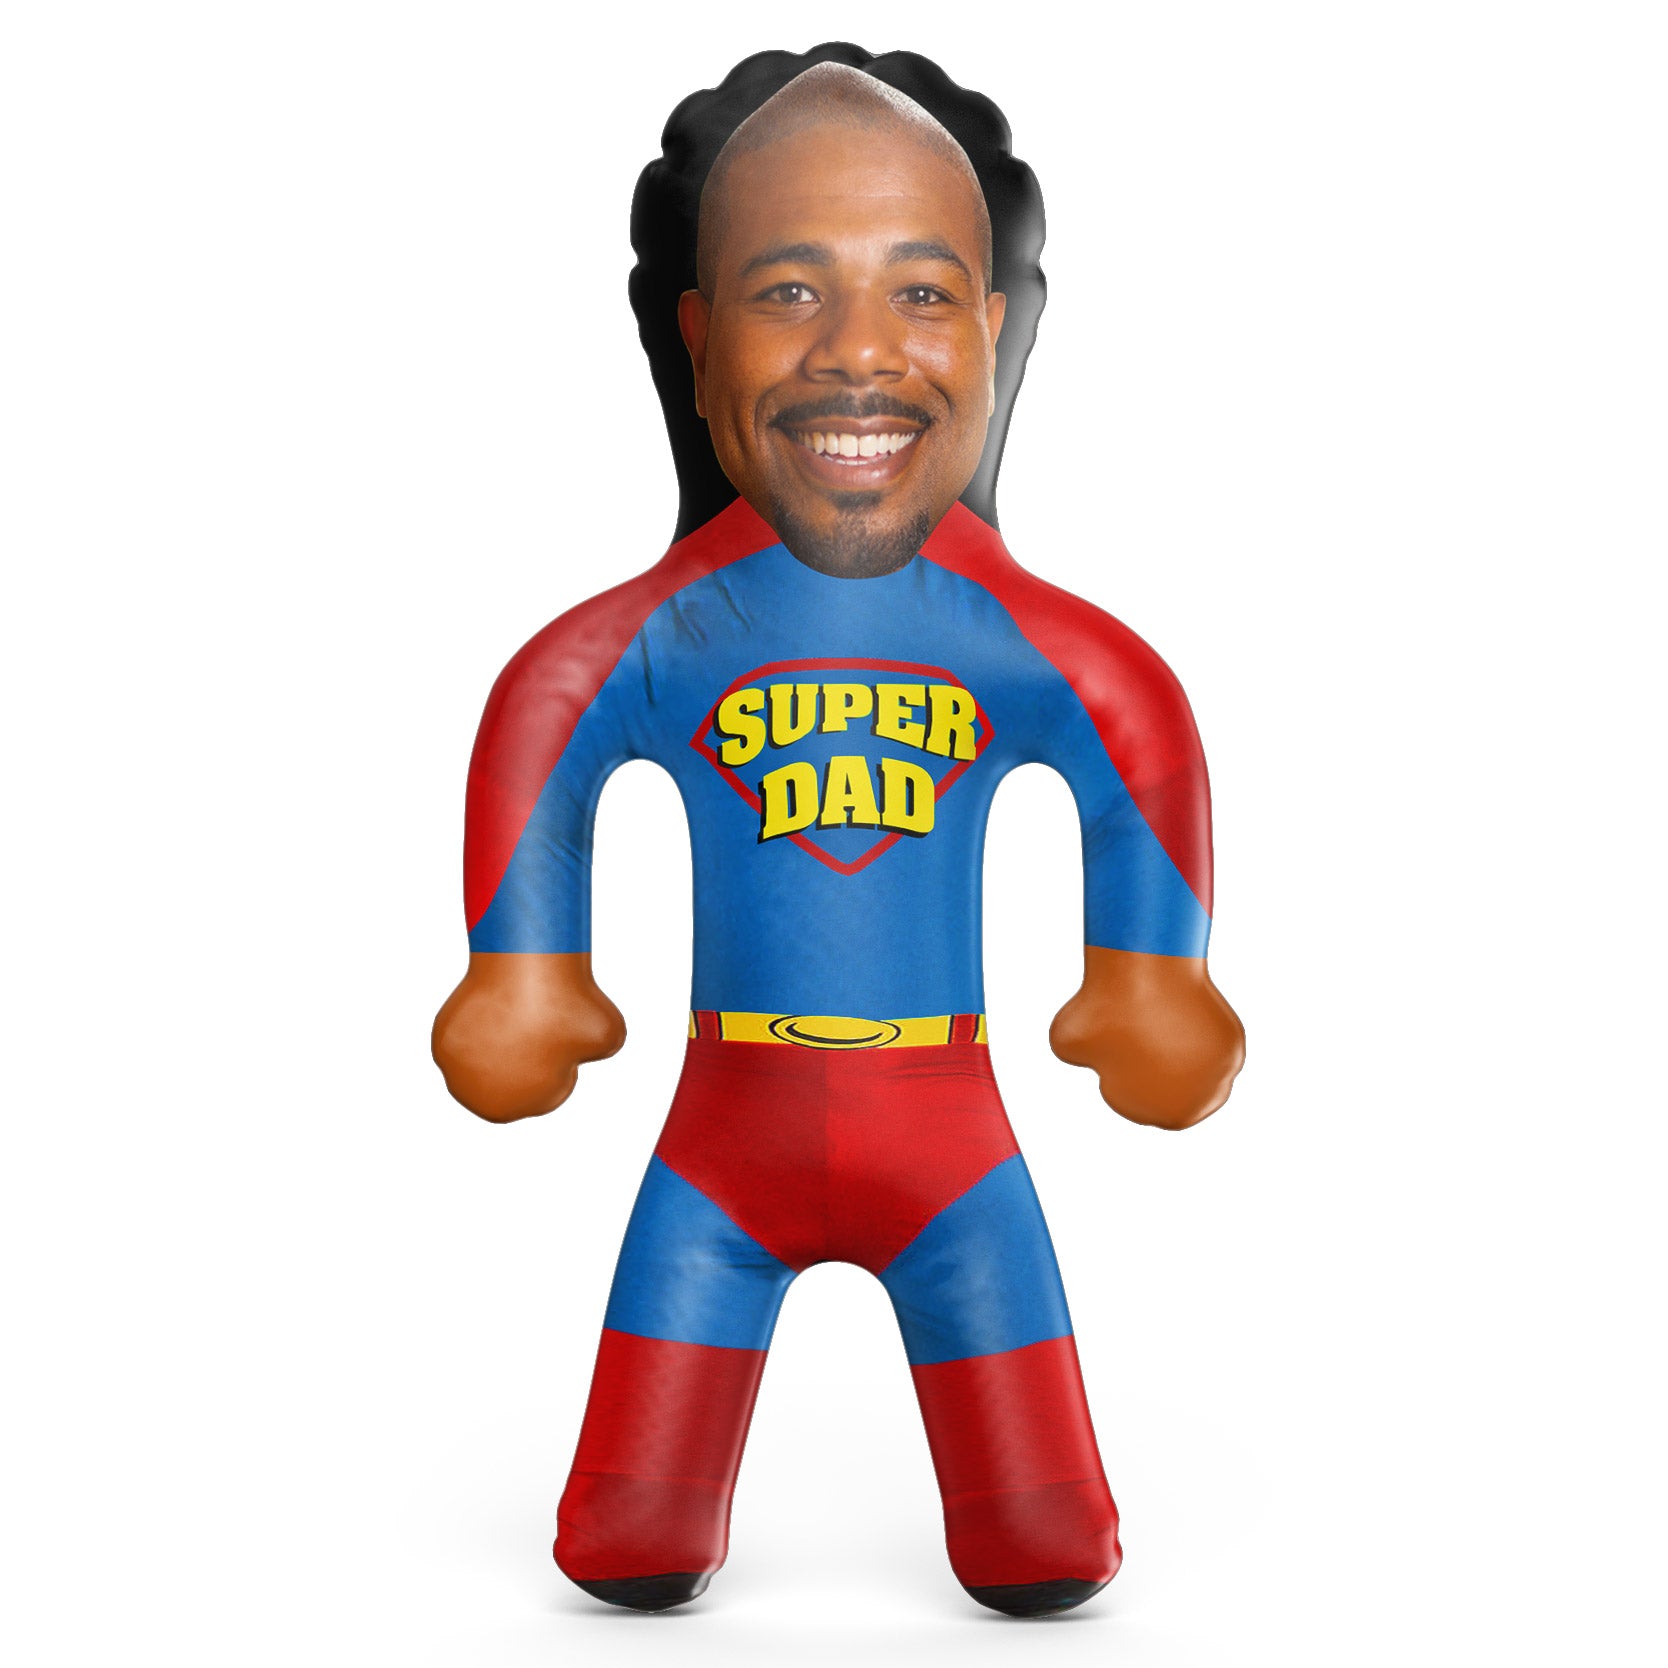 Super Dad Inflatable Doll - Custom Blow Up Doll